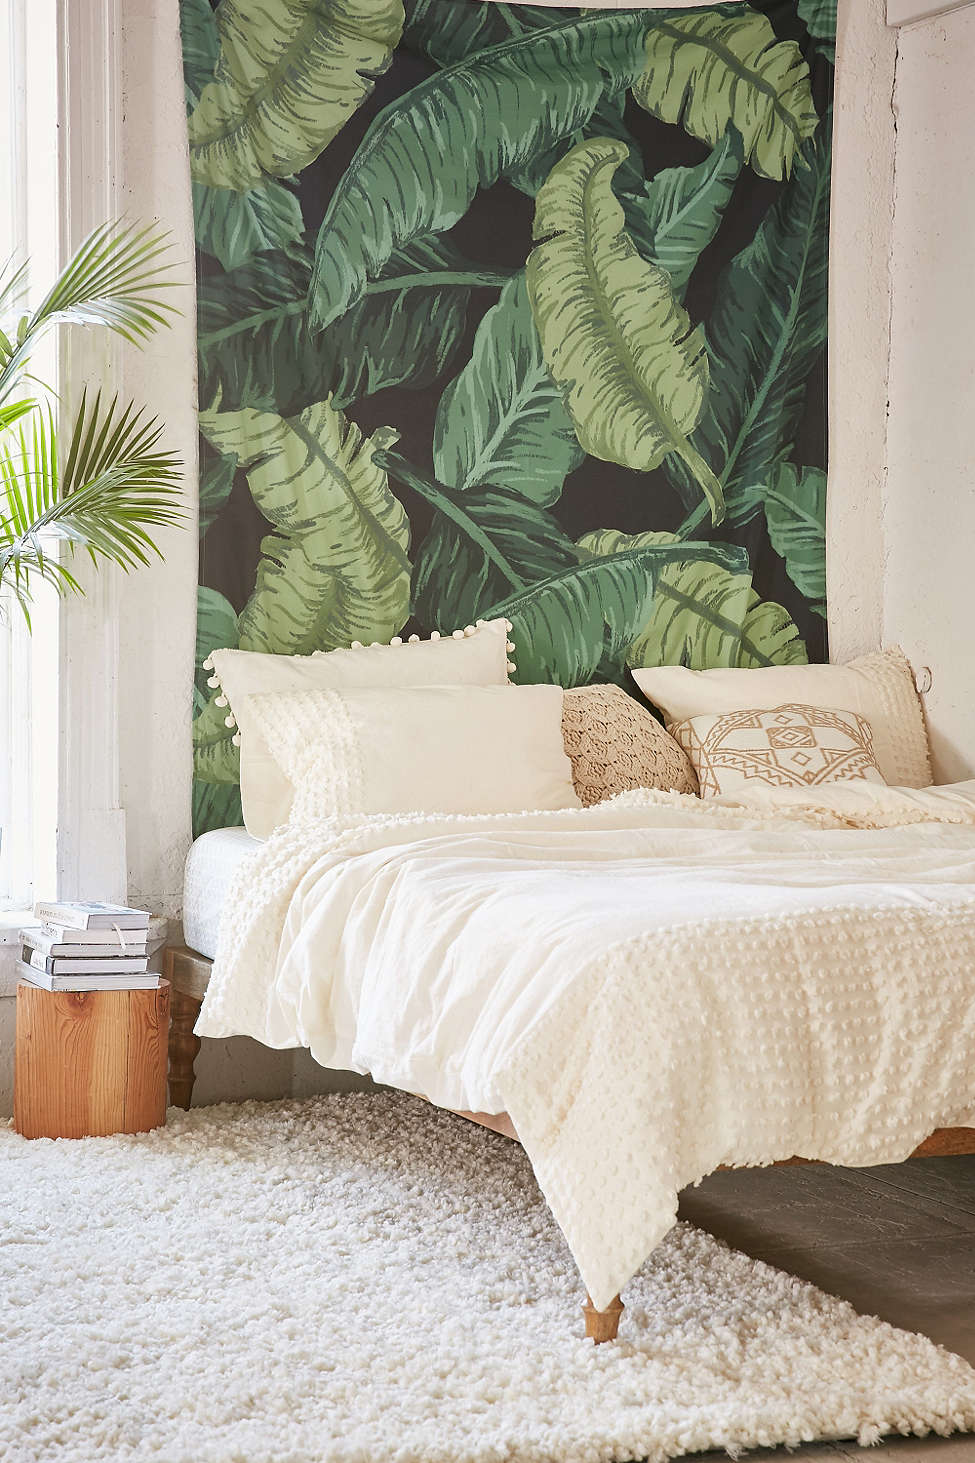 Banana leaf tapestry from Urban Outfitters